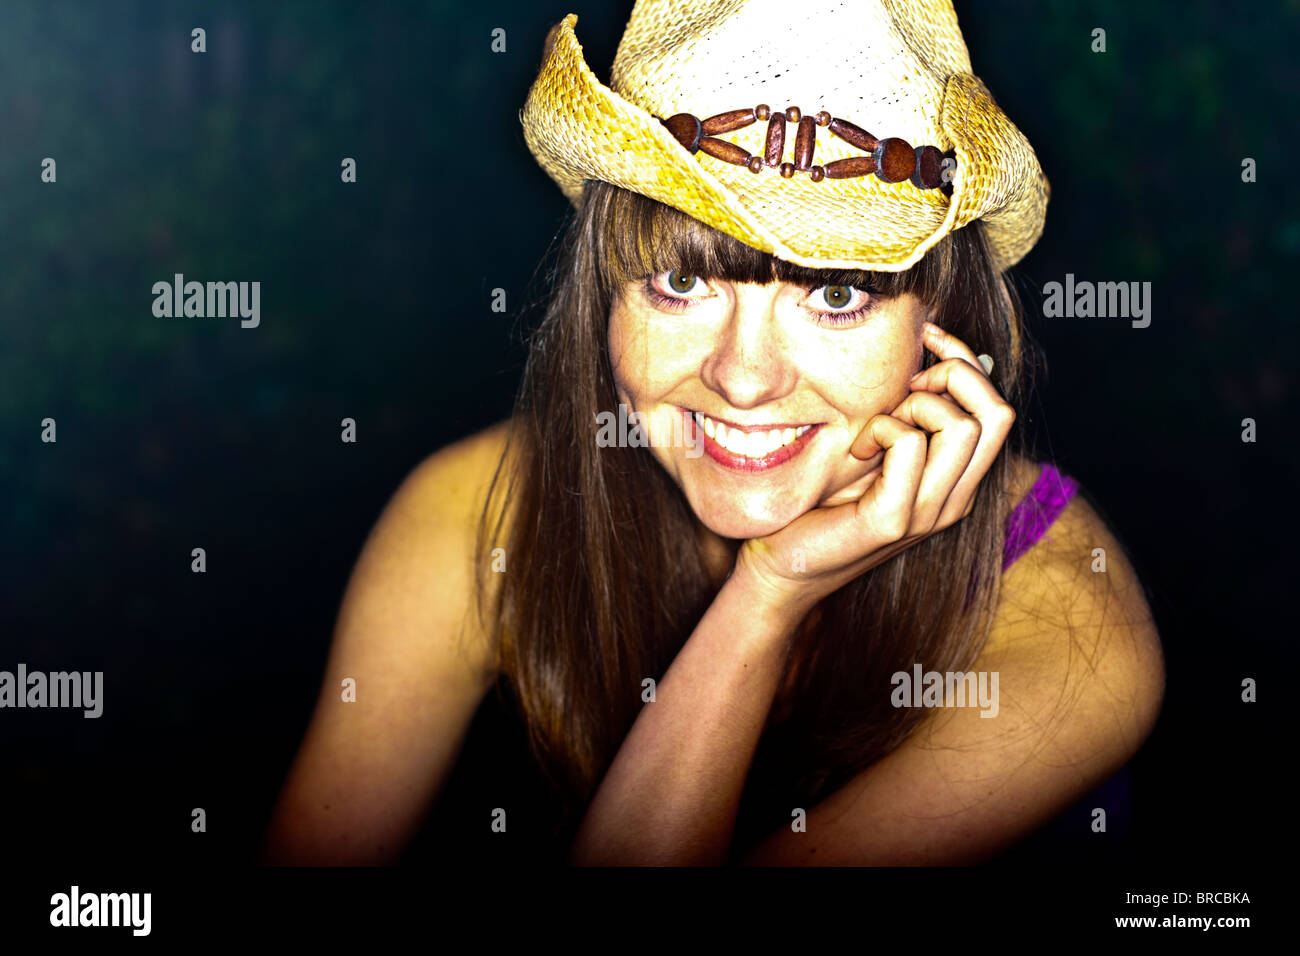 Head and shoulder portrait of a young woman smiling and wearing a cowboy hat. Stock Photo